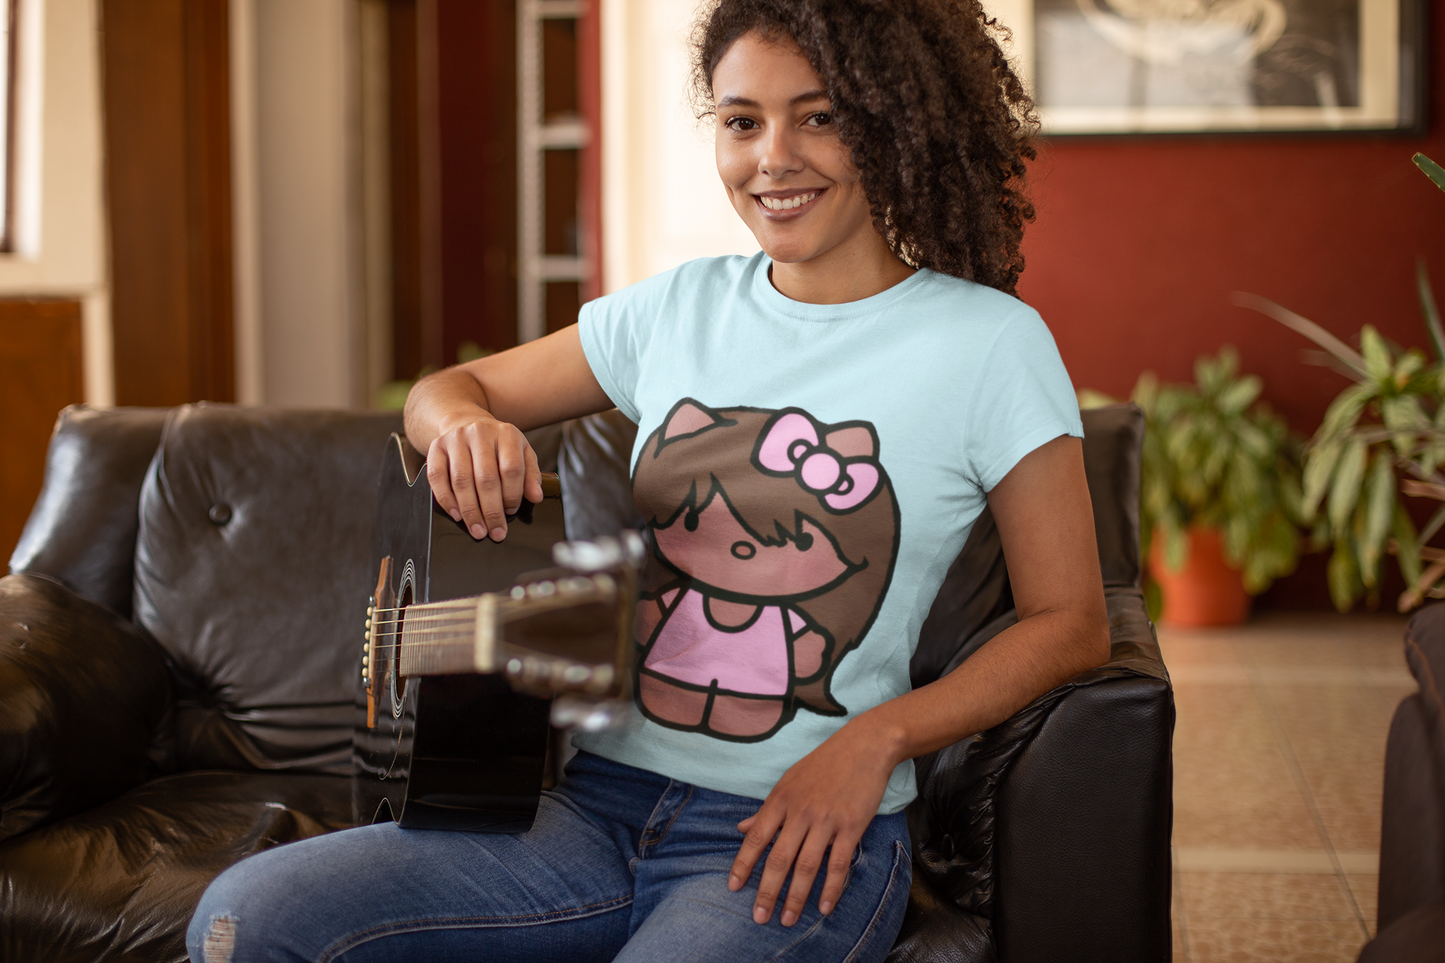 African American Kitty Inspired With Brown Hair Ladies T Shirt